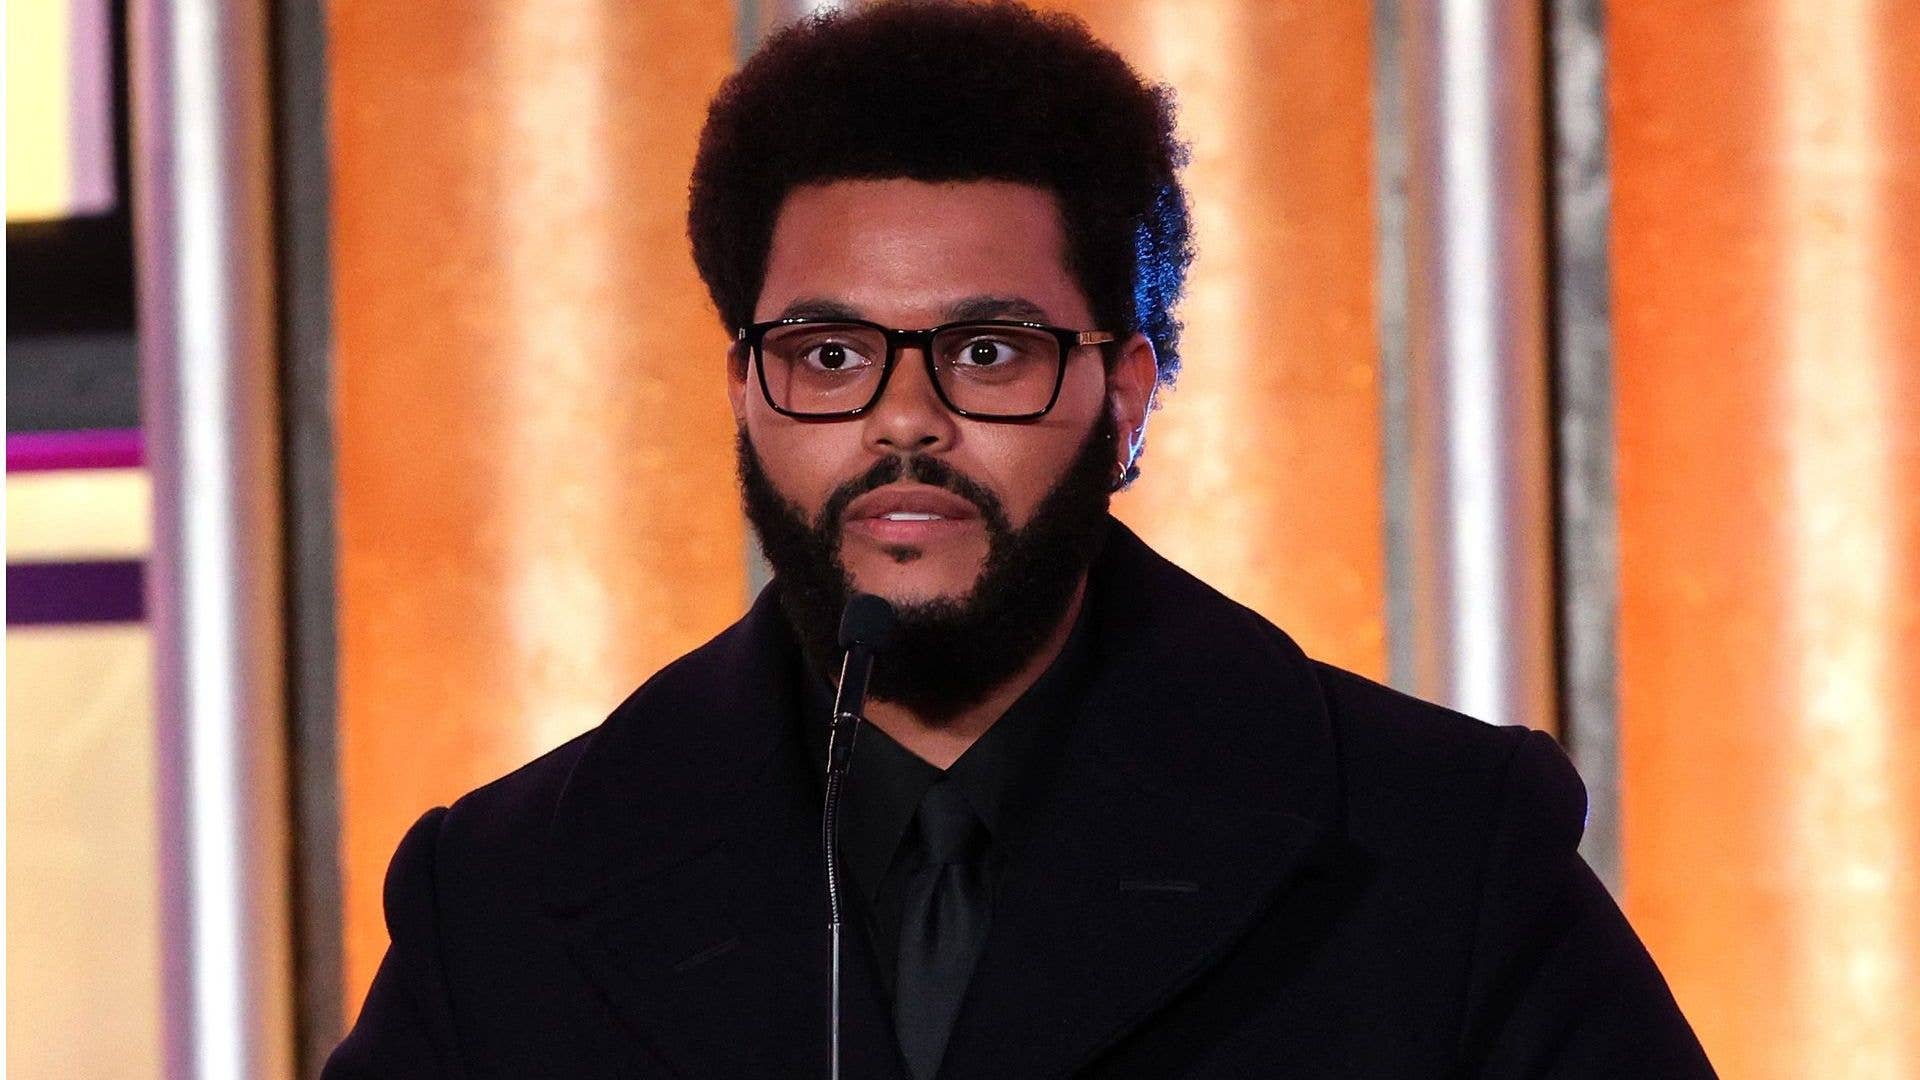 The Weeknd accepts The Quincy Jones Humanitarian Award onstage during the Music in Action Awards Ceremony